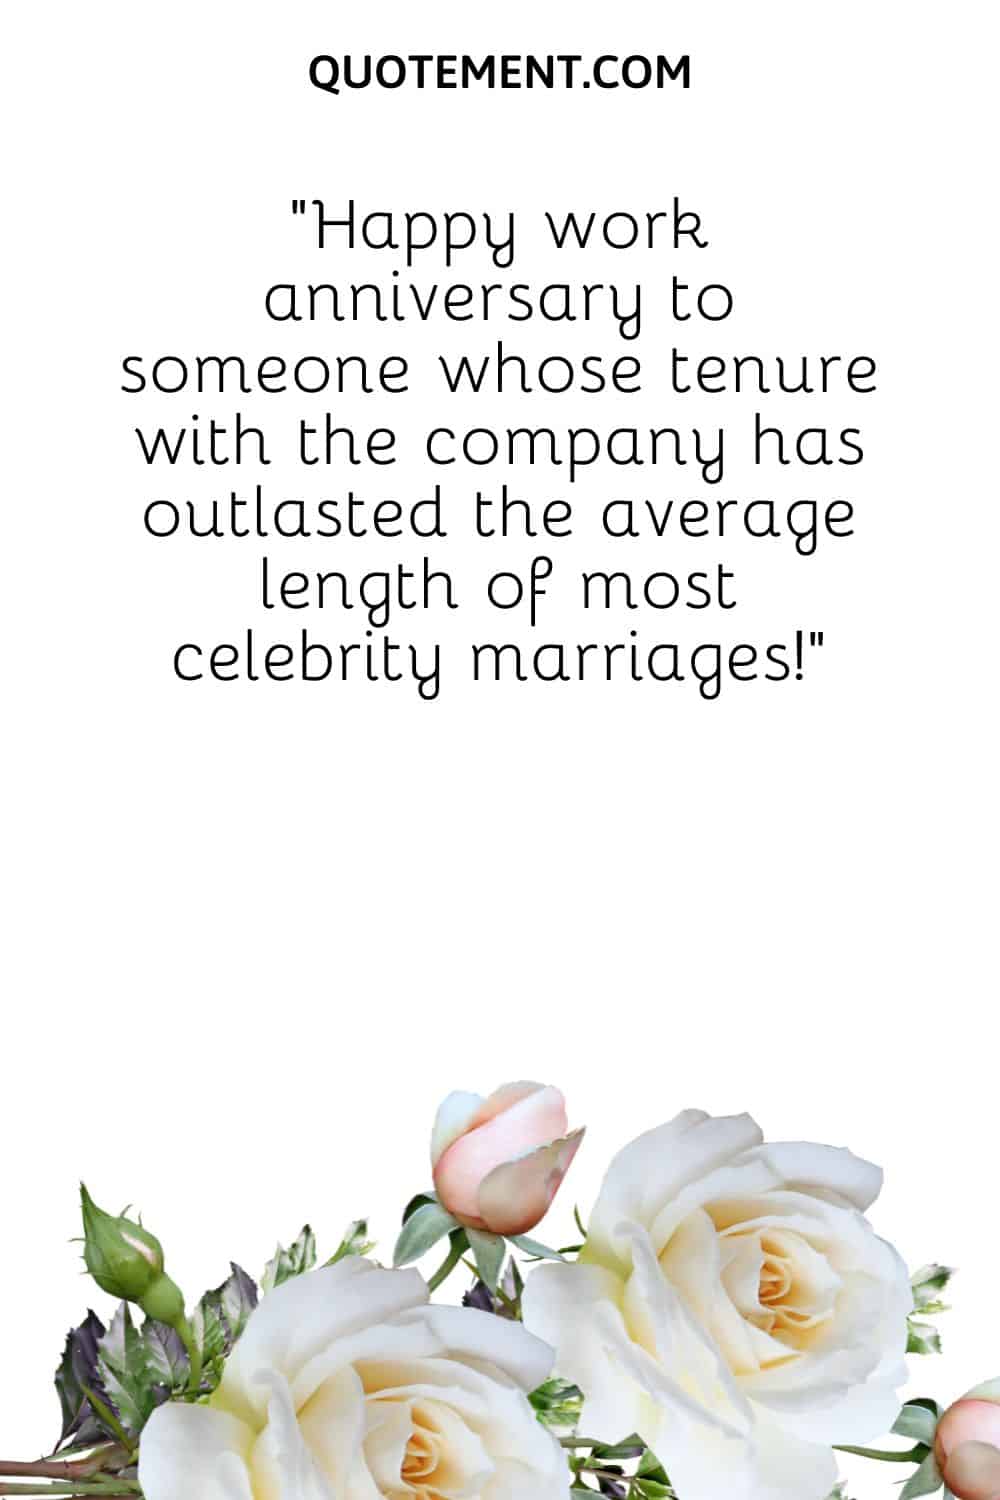 “Happy work anniversary to someone whose tenure with the company has outlasted the average length of most celebrity marriages!”